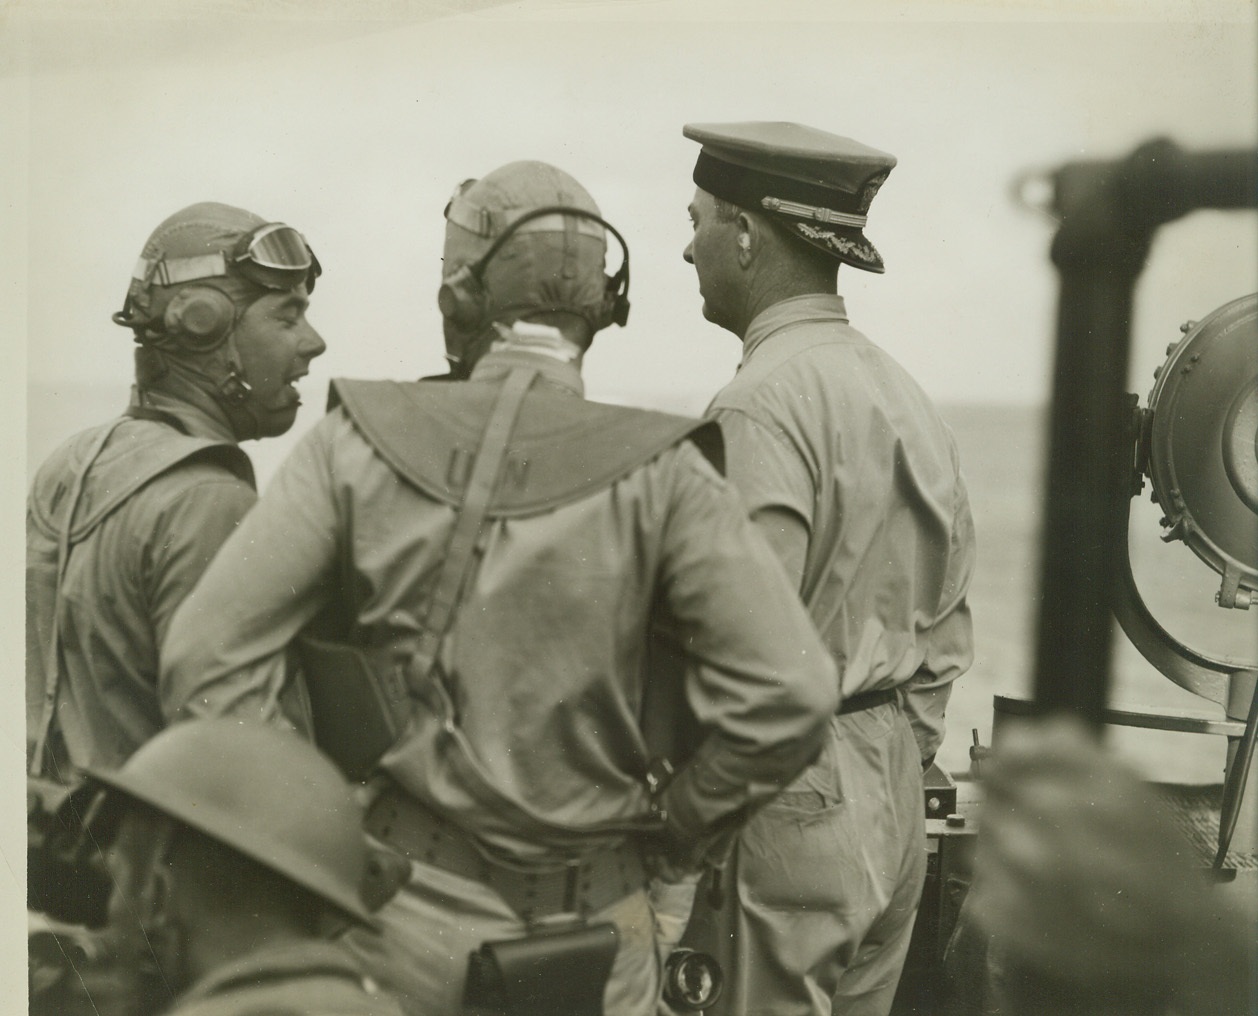 NAVY OFFICERS ON BRIDGE DURING CLASH WITH JAPS, 3/30/1942. SOMEWHERE IN THE PACIFIC – Officers on the bridge of a warship, part of a task force of the United States Pacific Fleet, during a hot engagement with Japs “somewhere in the Pacific.” Officer on right with his hat on backwards is captain of ship. Note cotton stuffed in his ears to protect them from injury during heavy gunfire. Two men on left are Navy fliers. Credit: ACME;